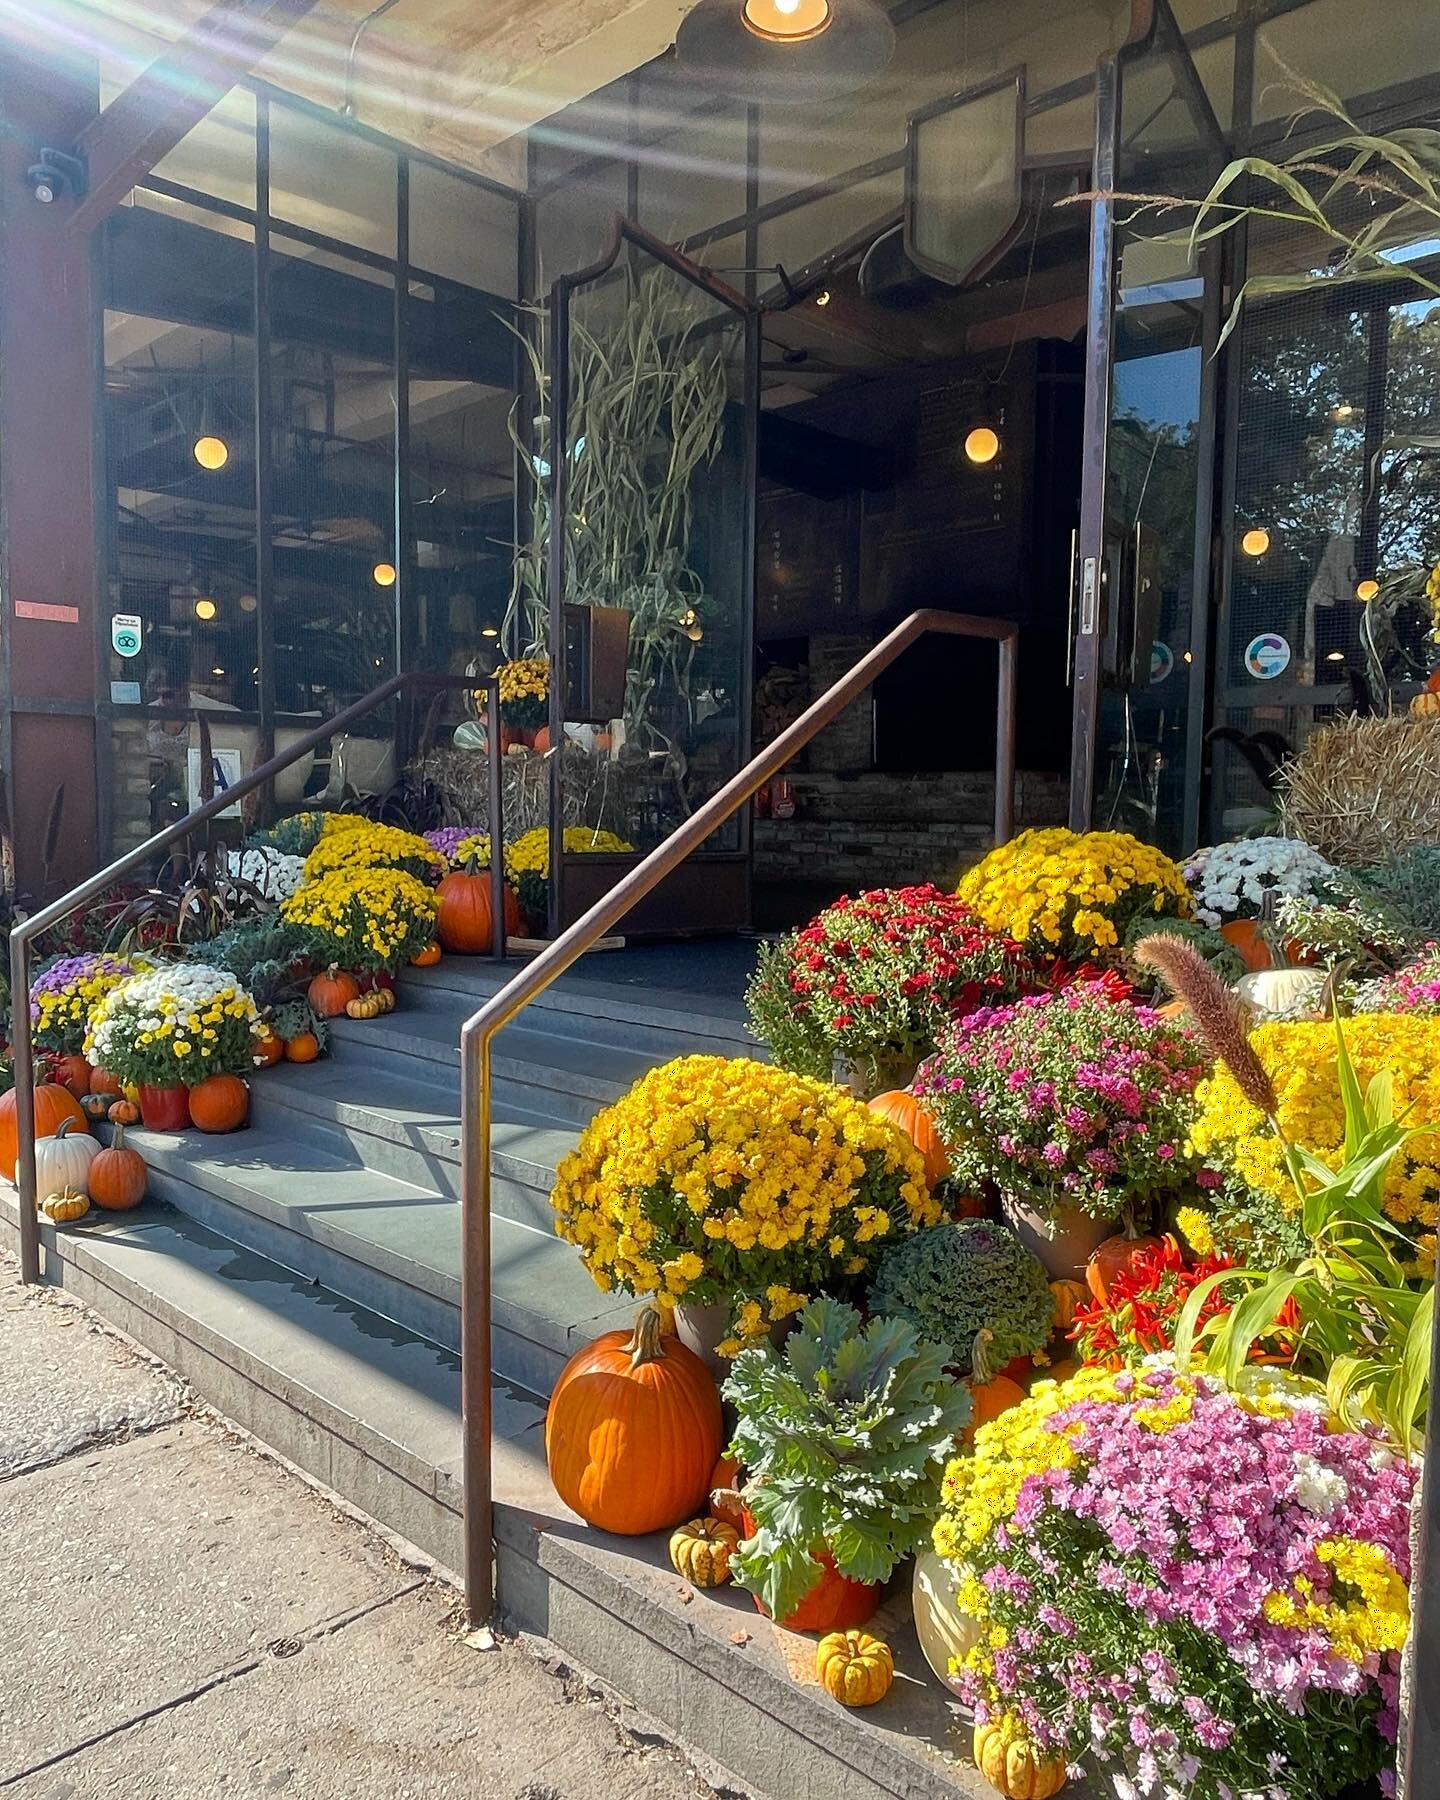 Our favorite time of year! 🍁🍻🍂🎃 

Oktoberfest beers + ciders are waiting for you. Outdoor seating available.

-
#spritzenhaus #nycbar #williamsburg #greenpoint #brooklynbars #infatuationnyc #greenpointers #nycdrinks  #timeoutnyc #oktoberfestnyc